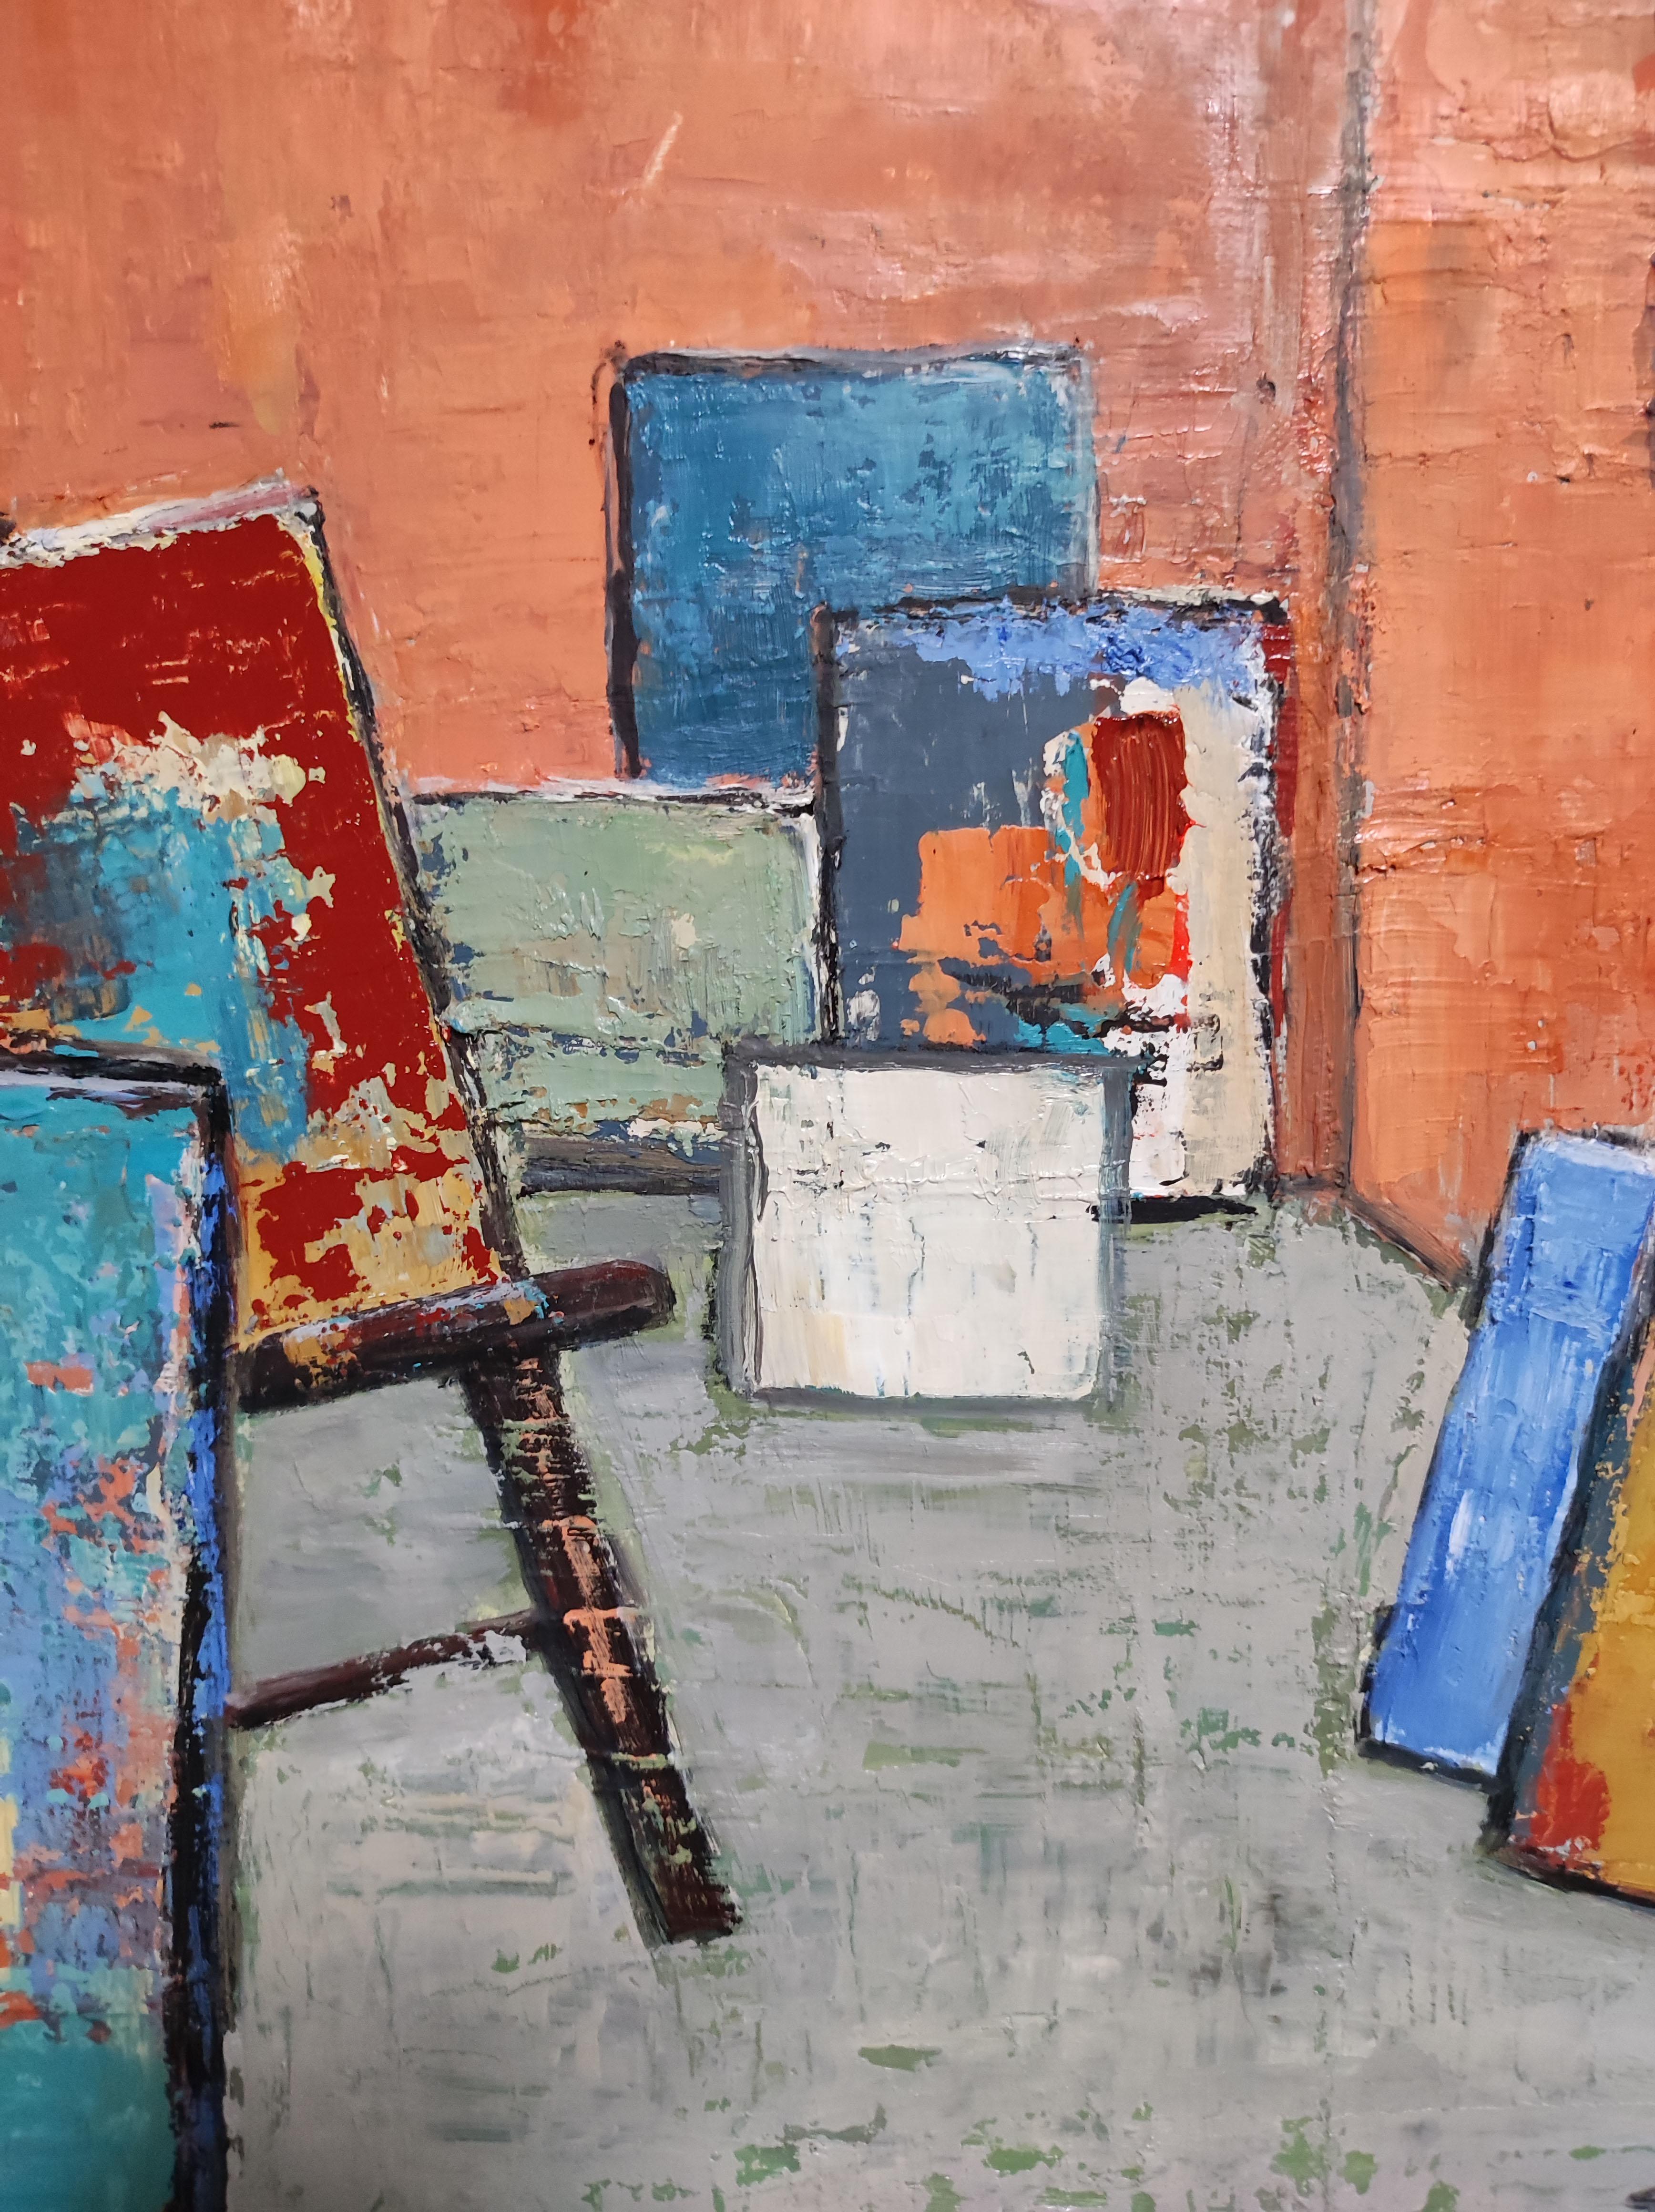 Abstract artist's studio in orange hues with a texture that is still present and hues that vibrate with the succession of layers on the canvas. The canvases are scattered on the floor or on an easel, just like in the artist's studio, which plunges